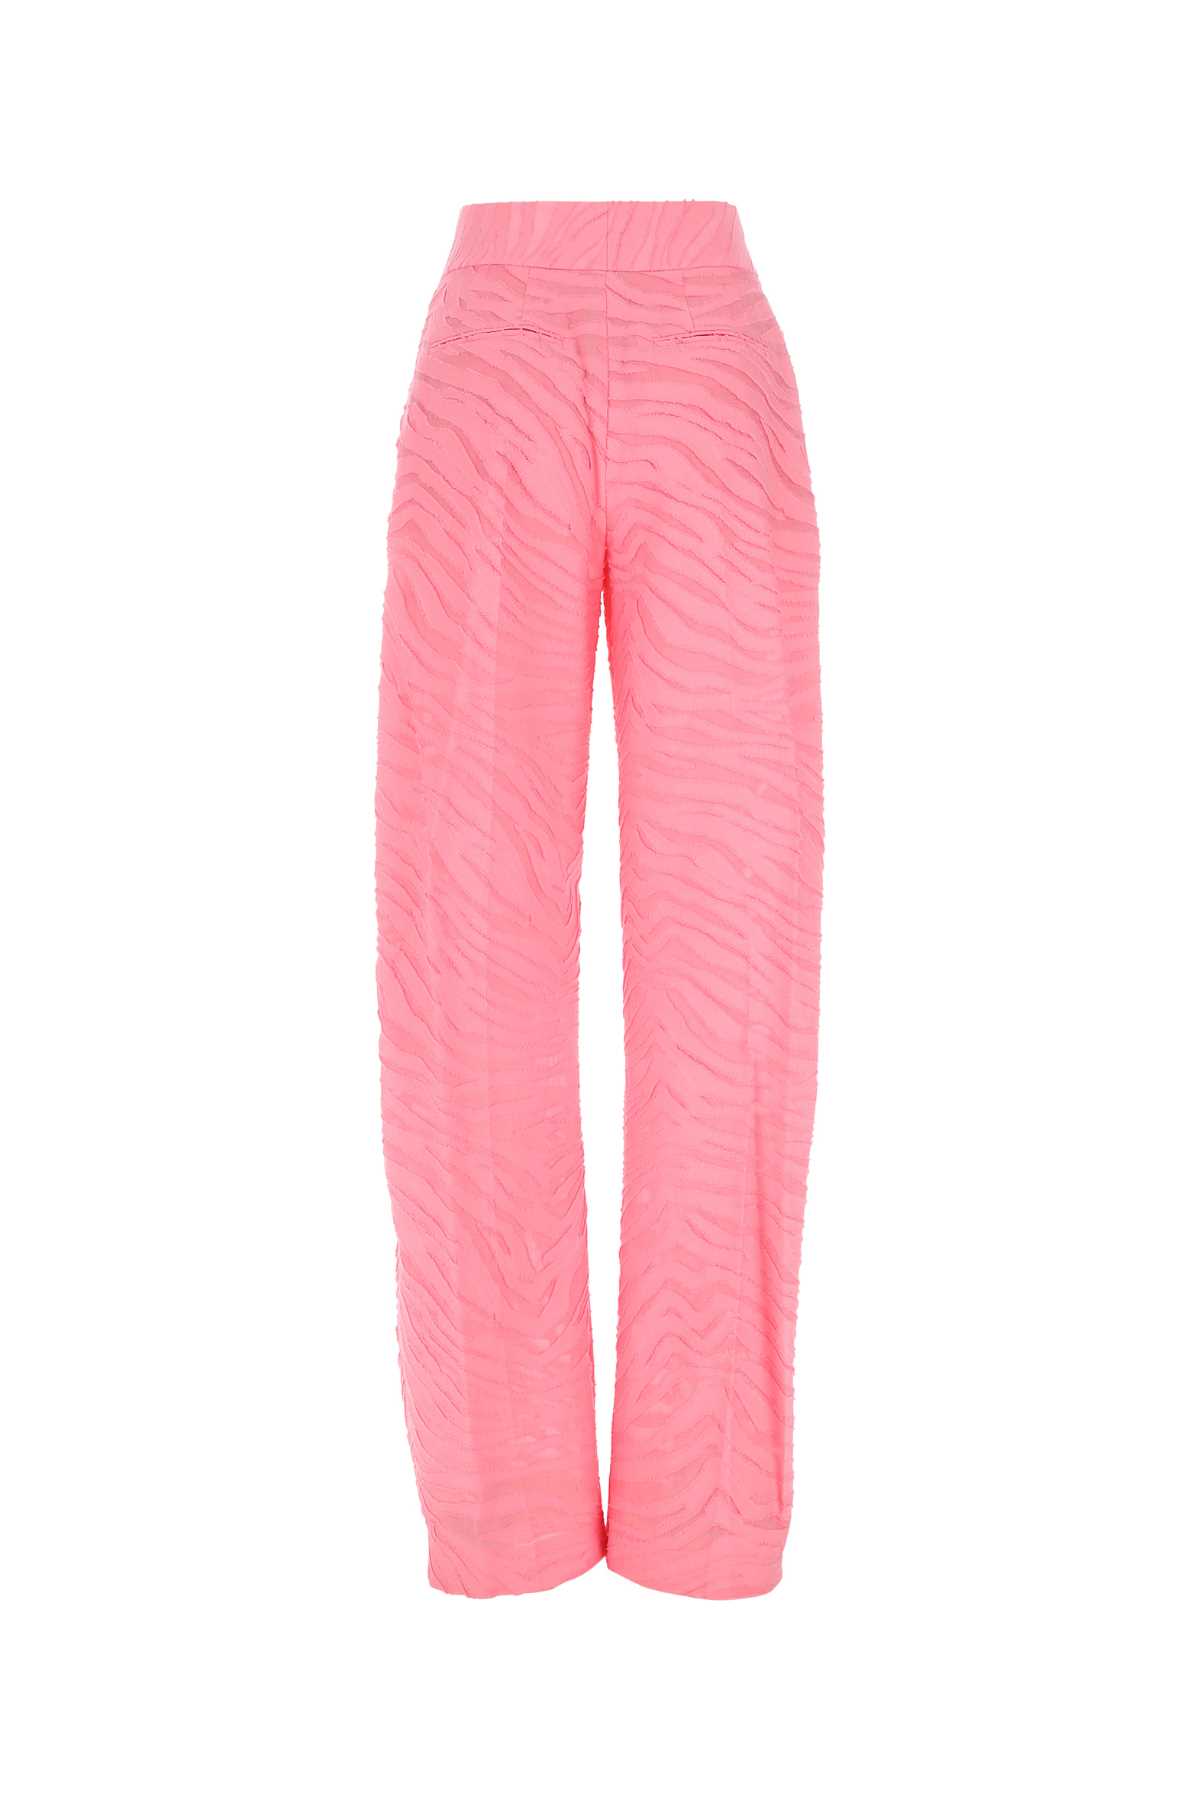 Attico Pink Cotton Blend Wide-leg Gary Pant In 119